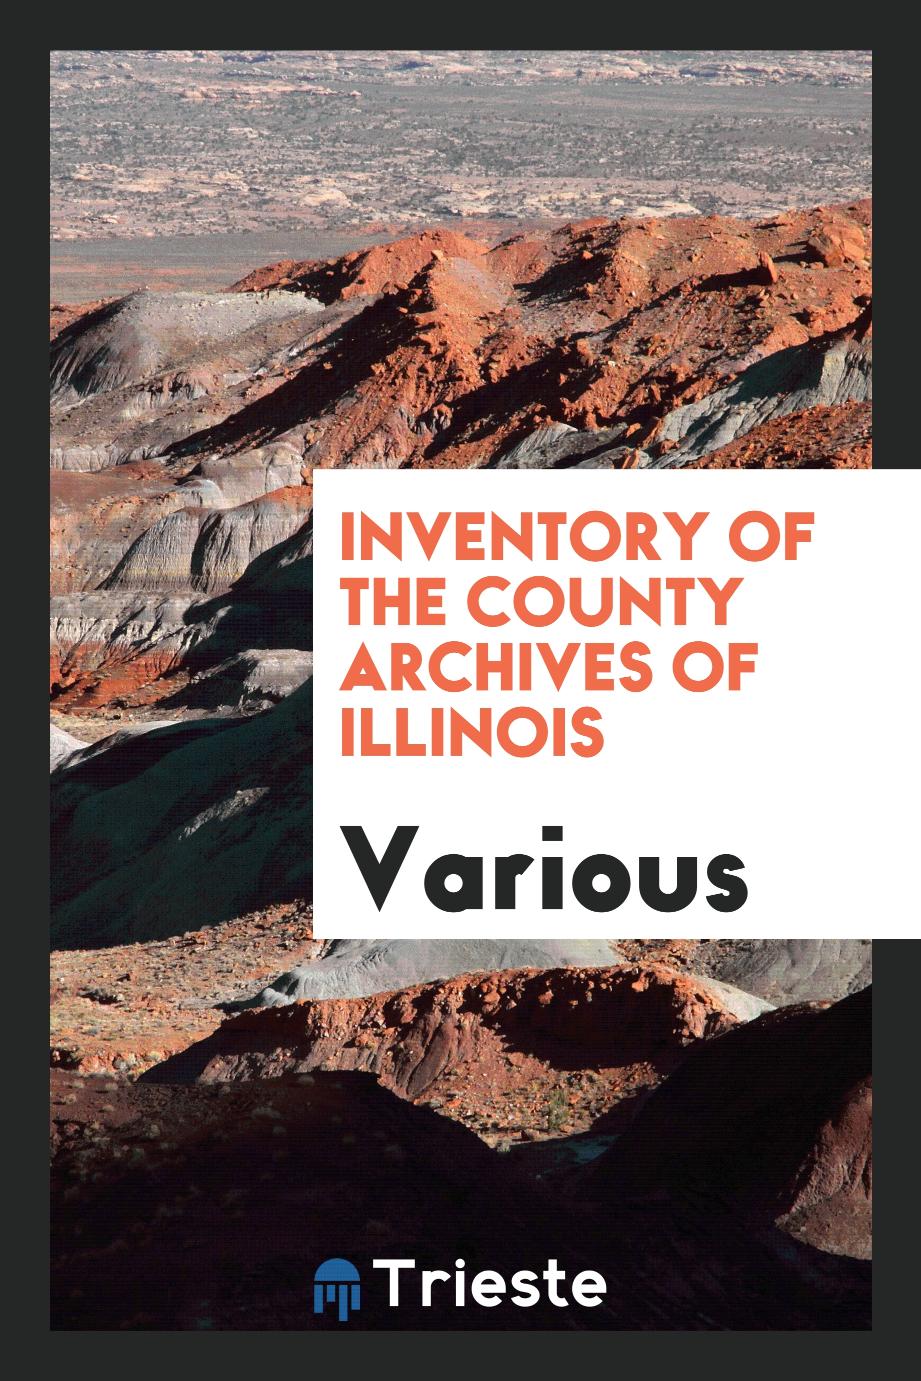 Inventory of the county archives of Illinois